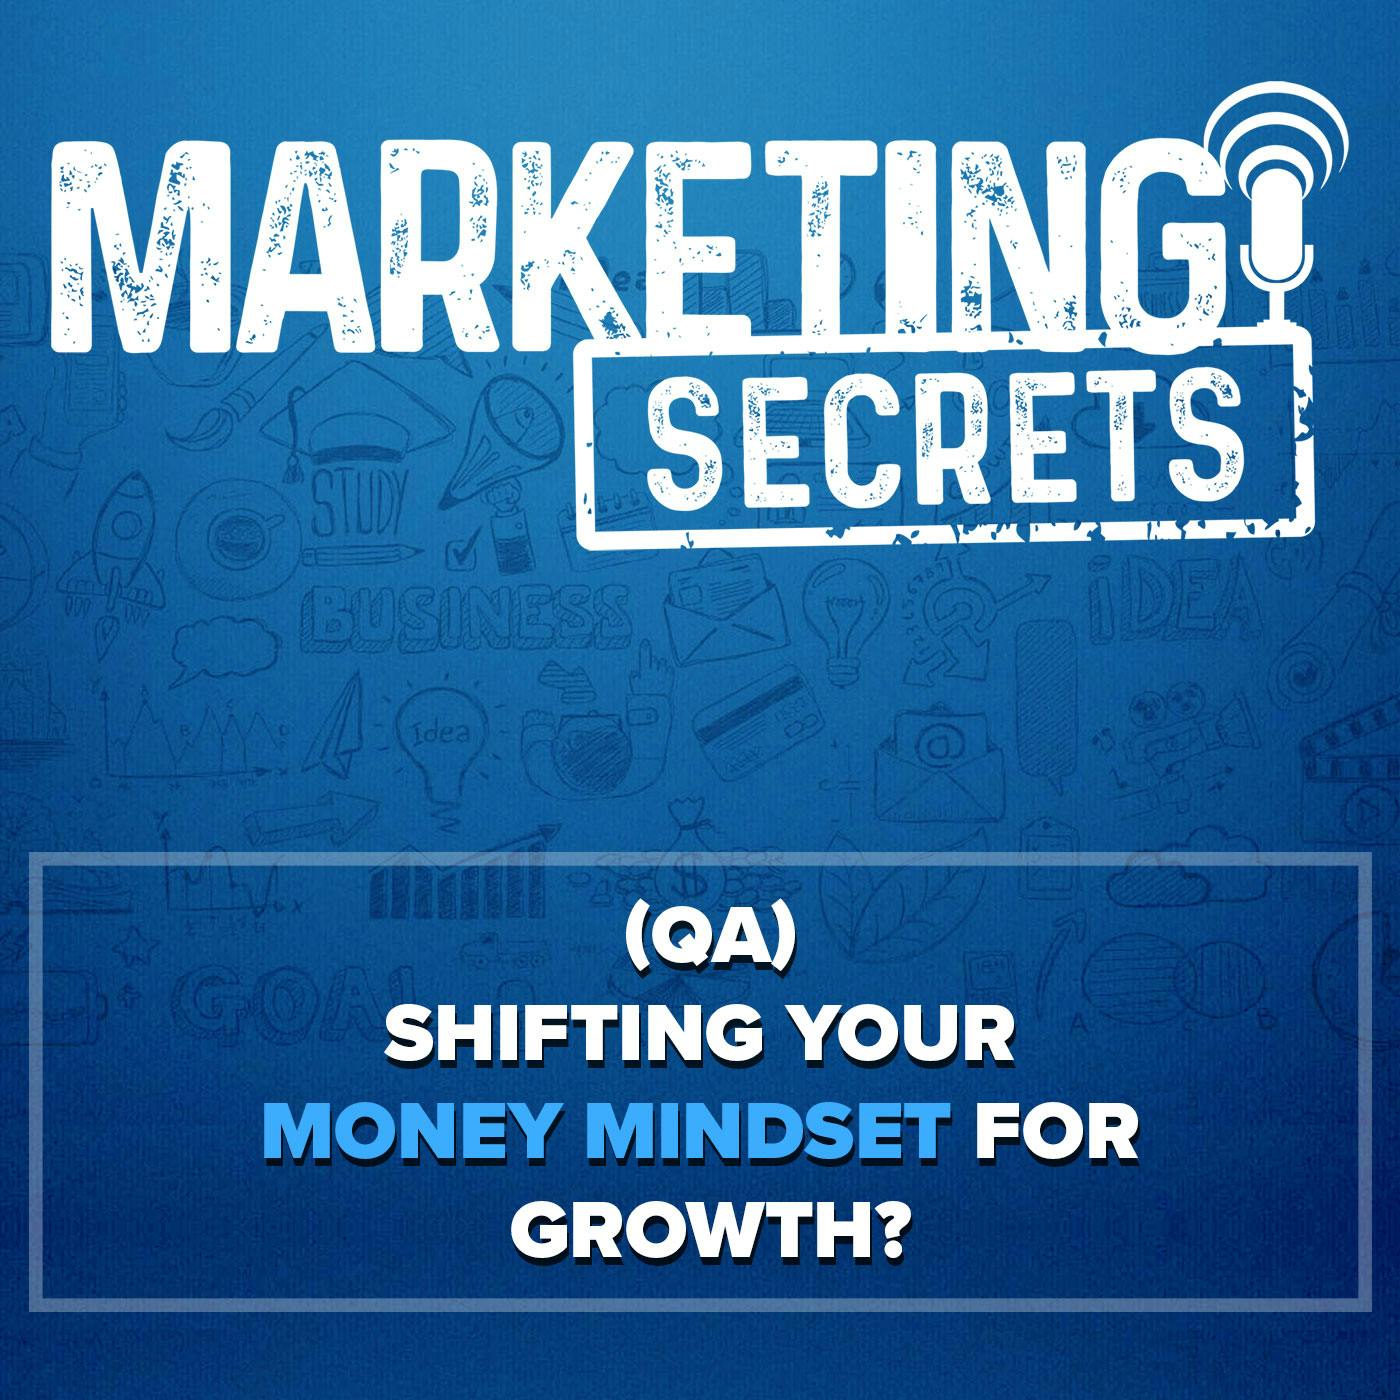 (Q&A) Shifting Your Money Mindset for Growth?